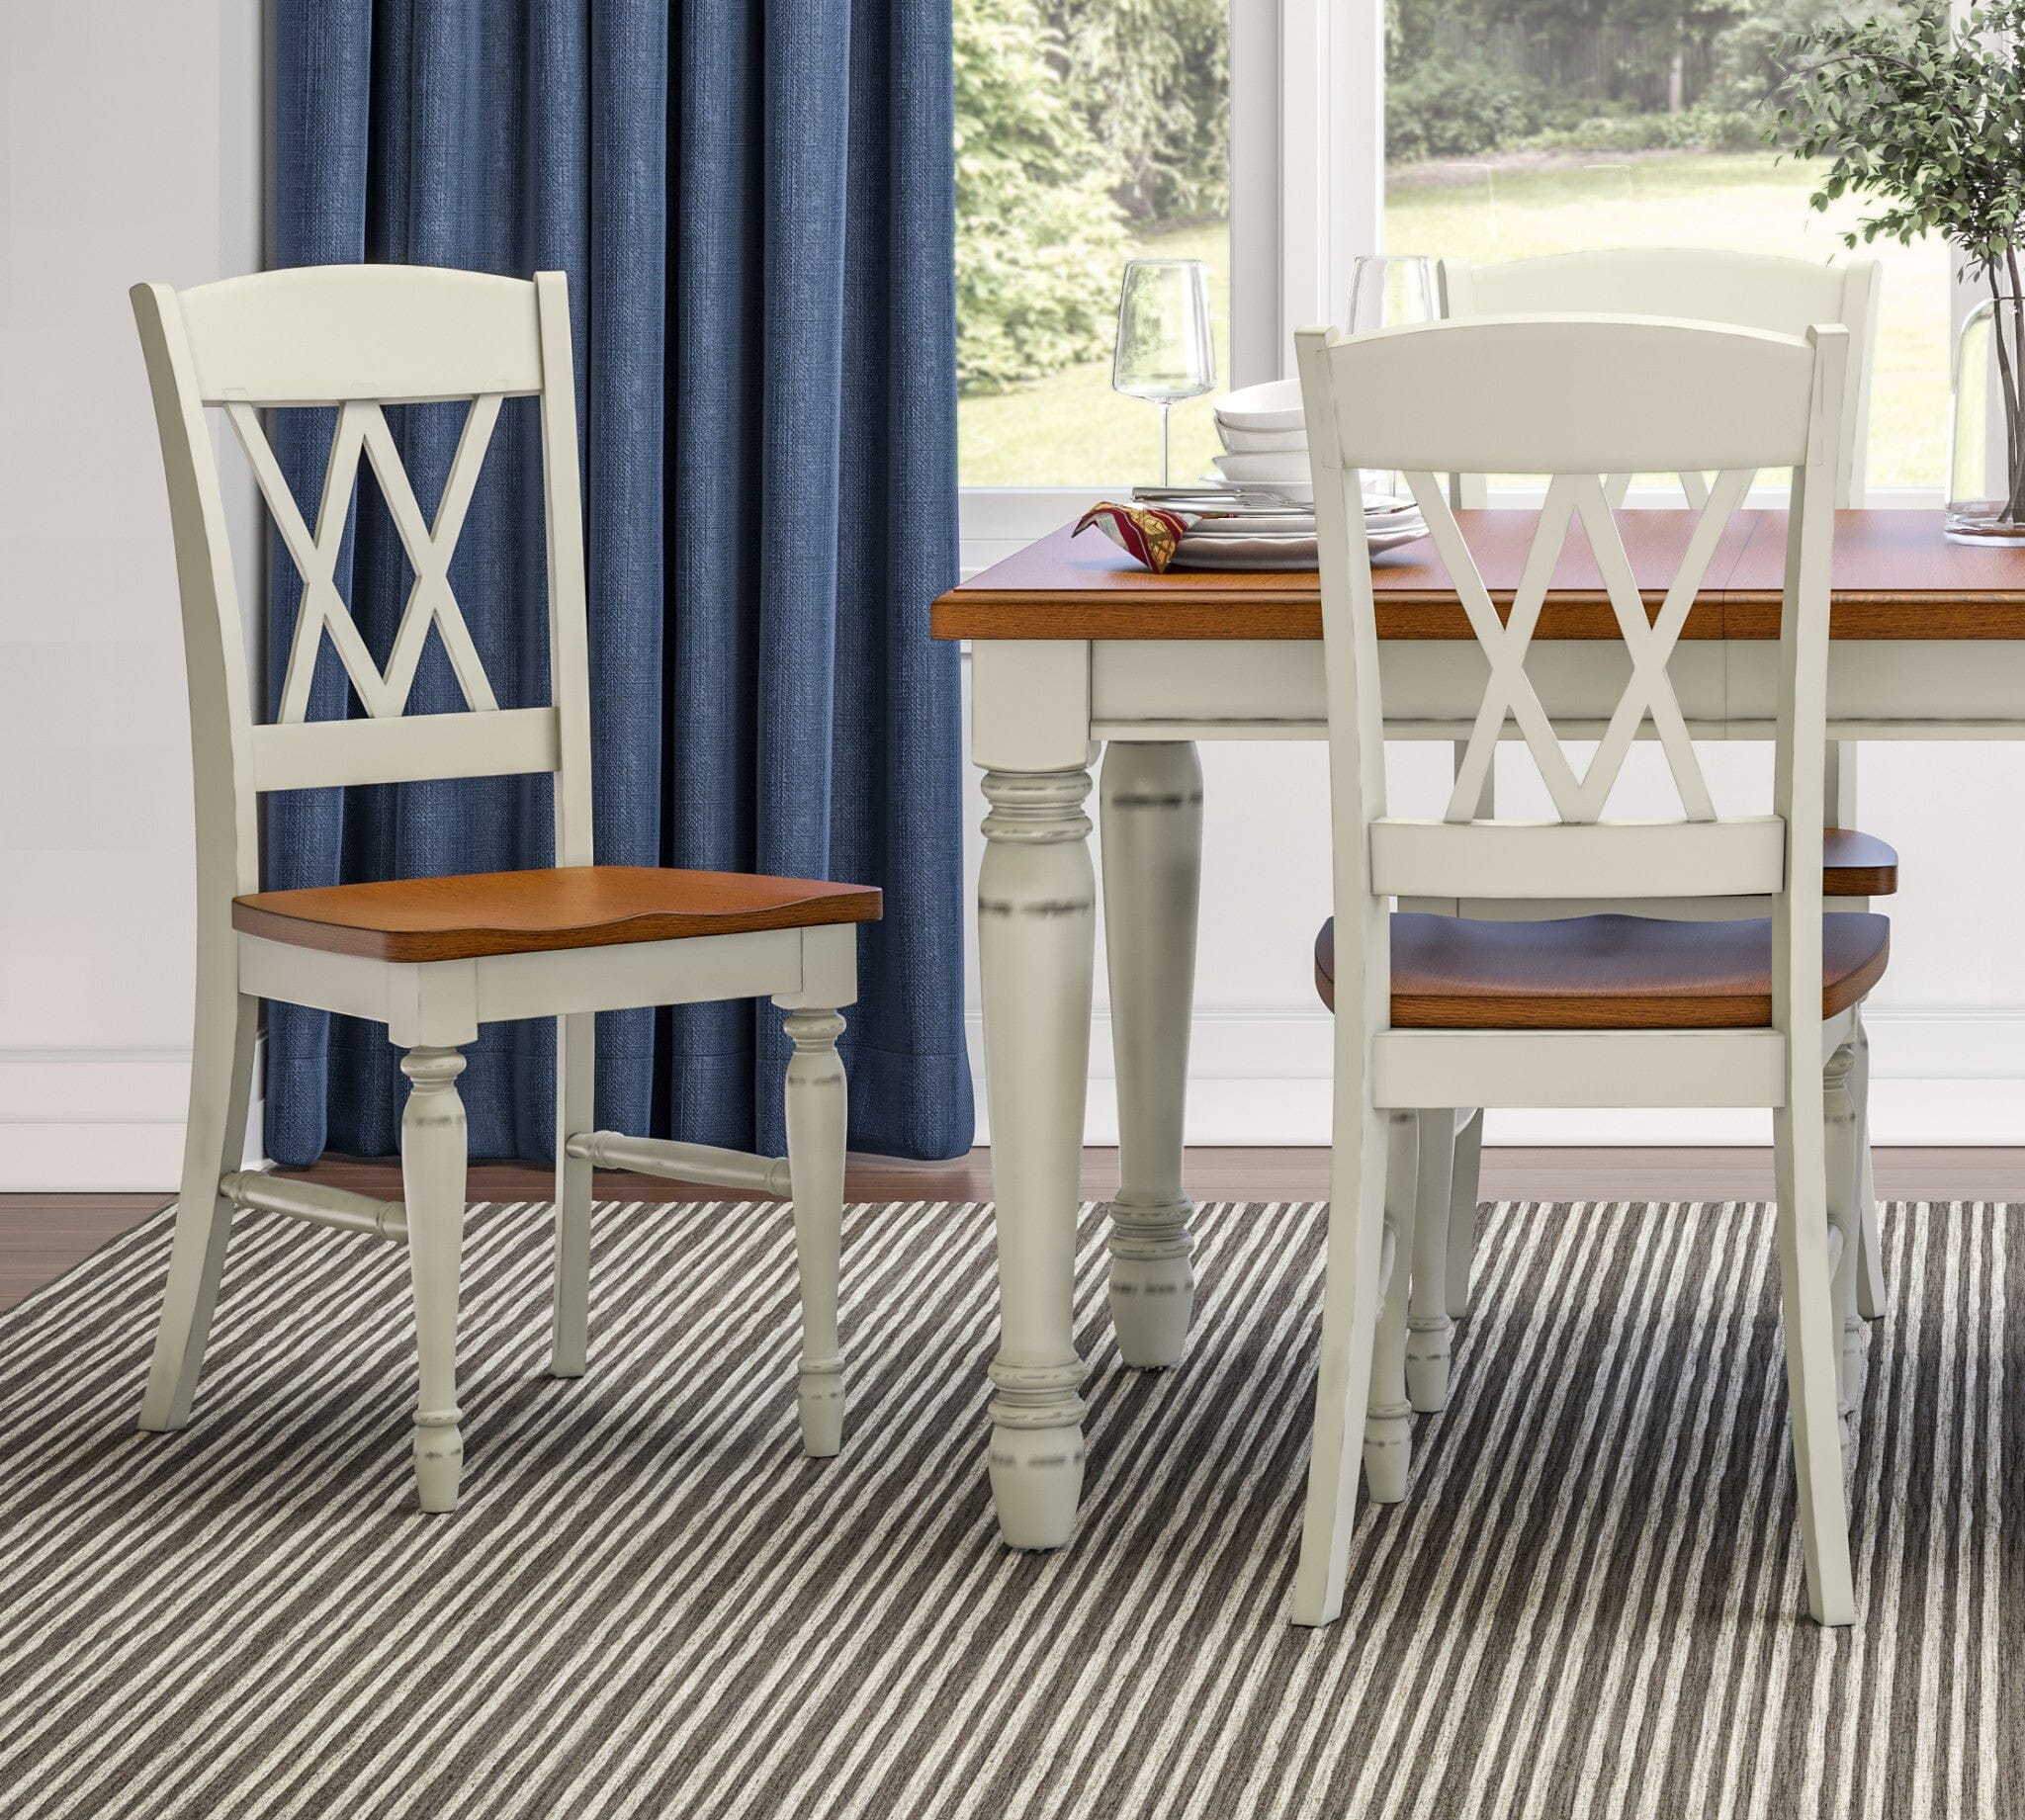 Traditional Dining Chair Pair By Monarch Dining Chair Monarch